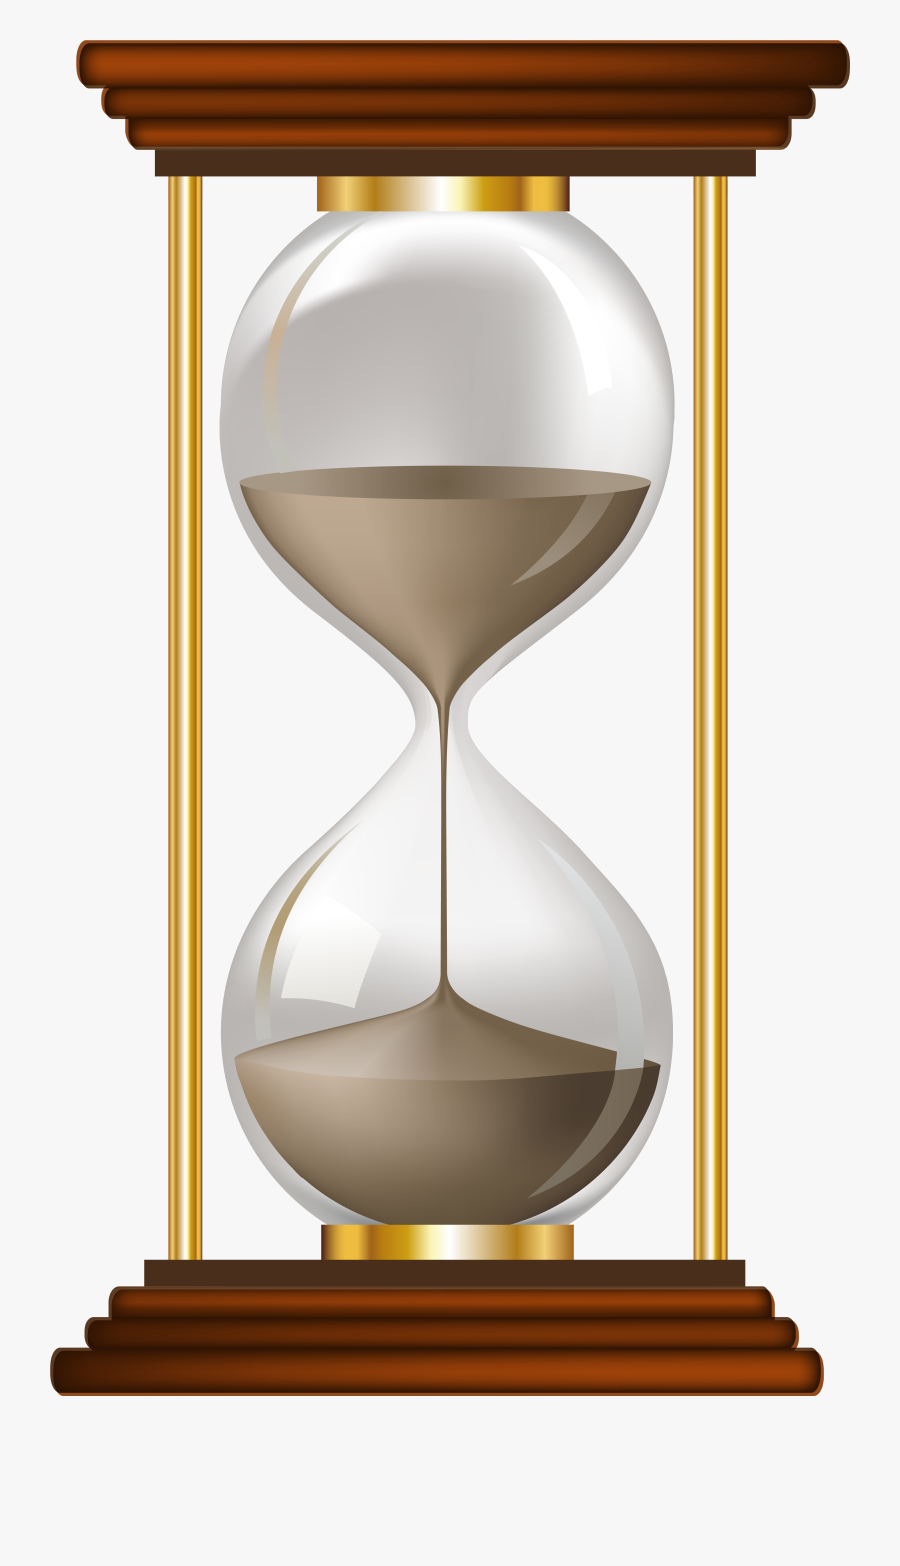 Sand Clock Png Clip - Different Types Of Clocks And Watches, Transparent Clipart